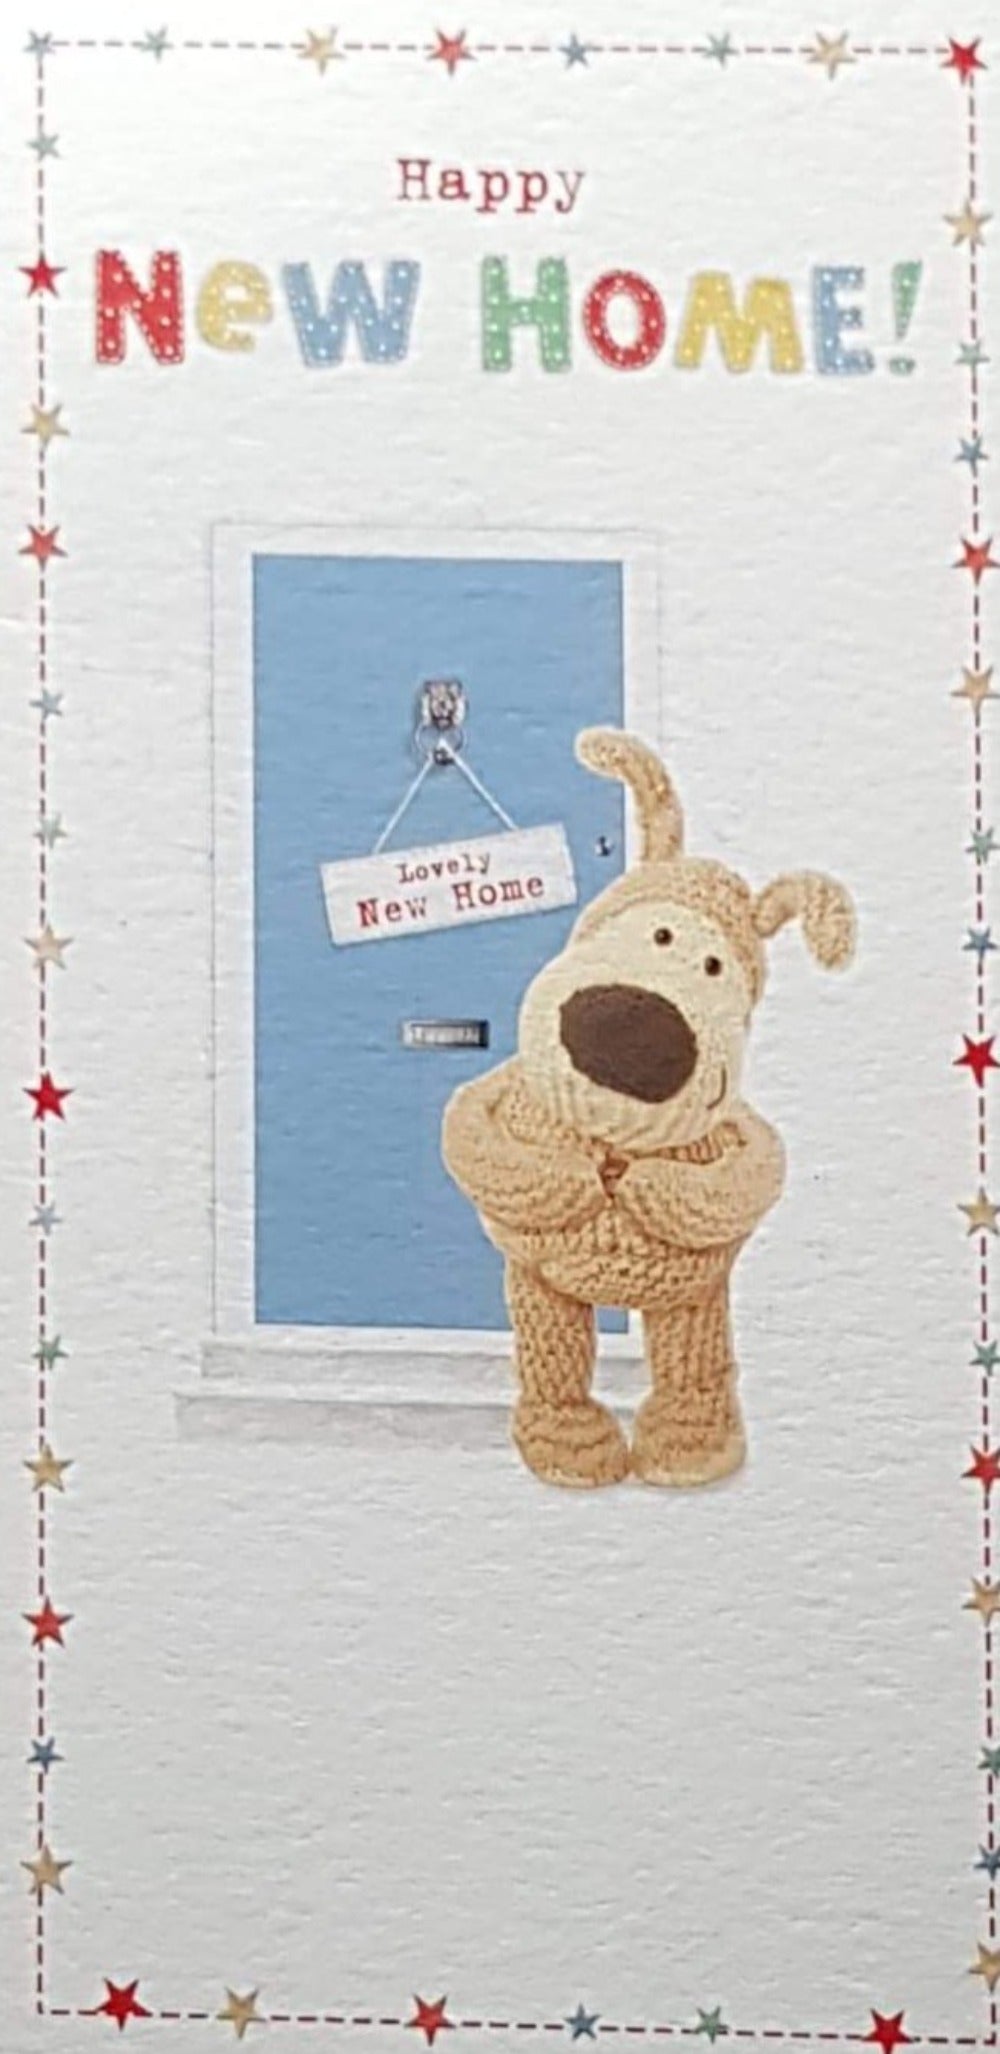 Congratulations Card - New Home / 'Lovely New Home' & A Stuffed Dog At The Door